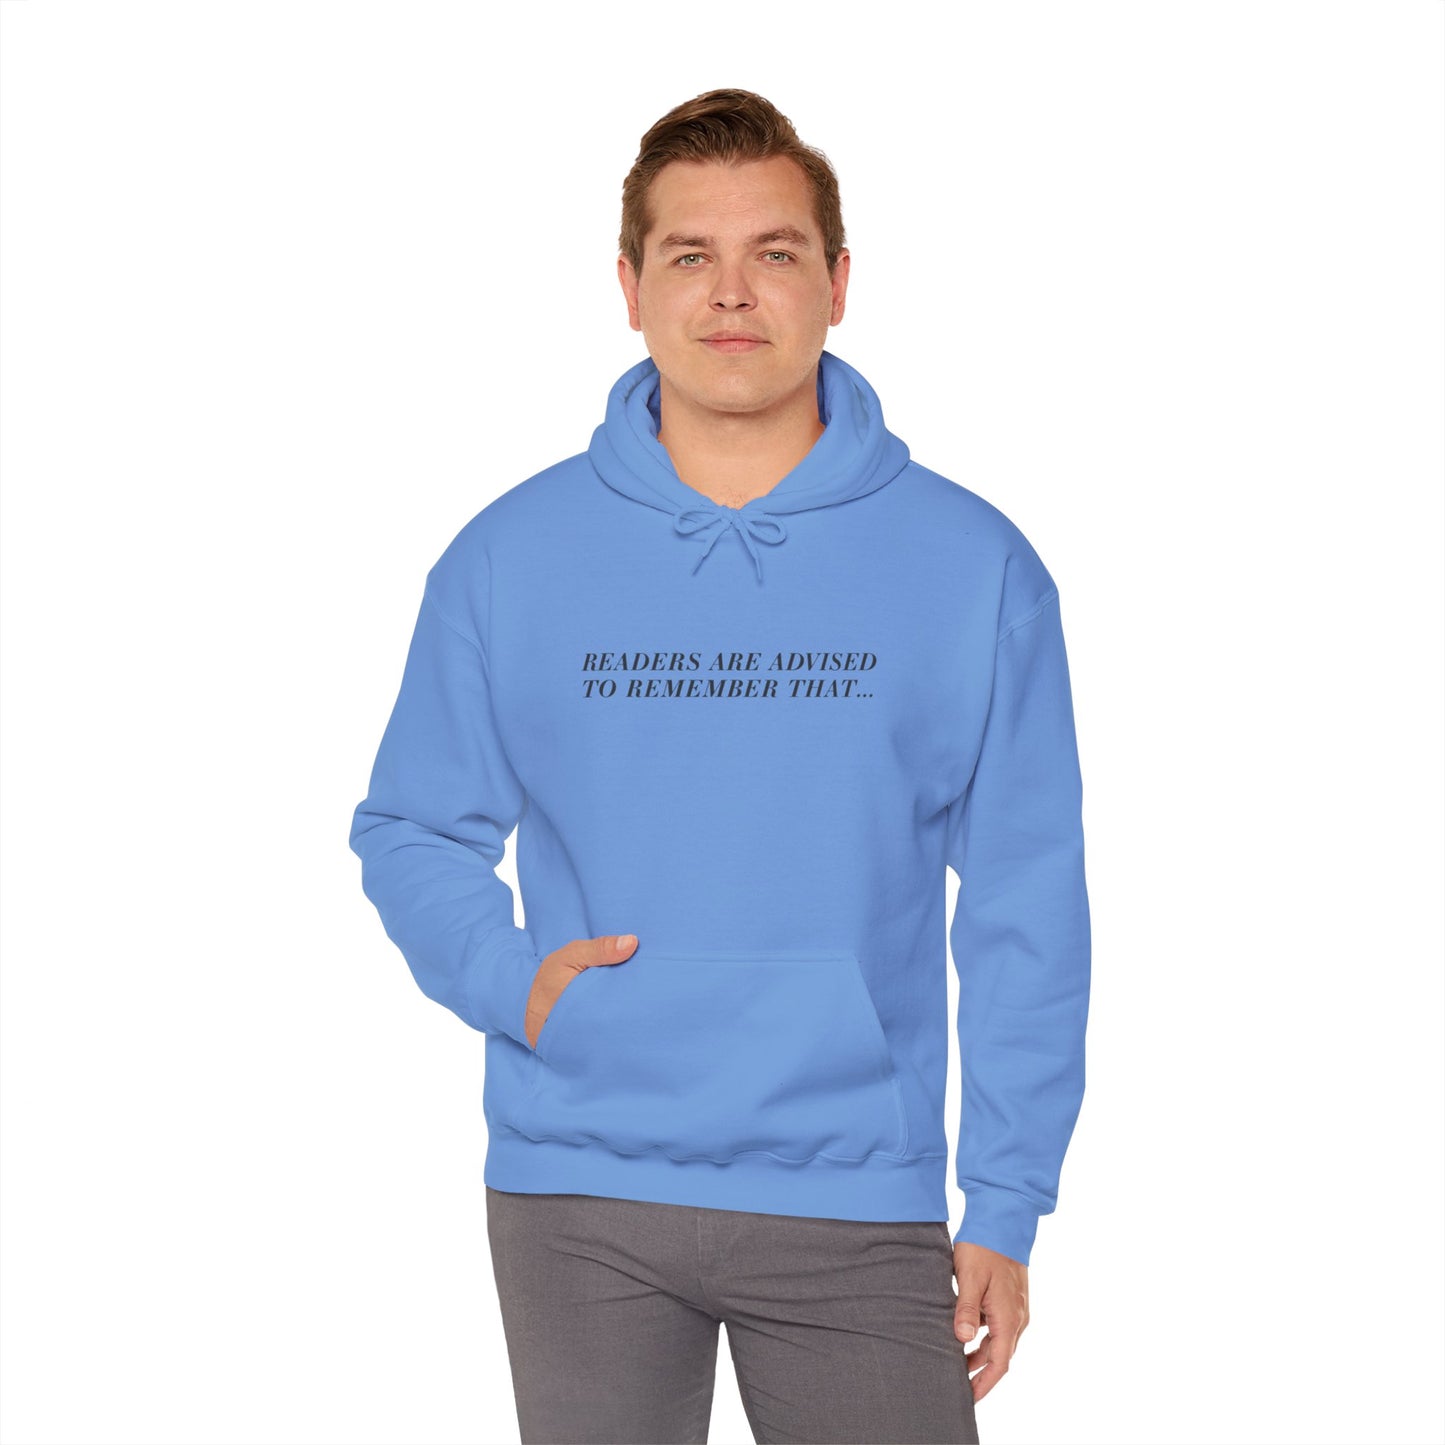 The Devil is a Liar front and back Hoodie